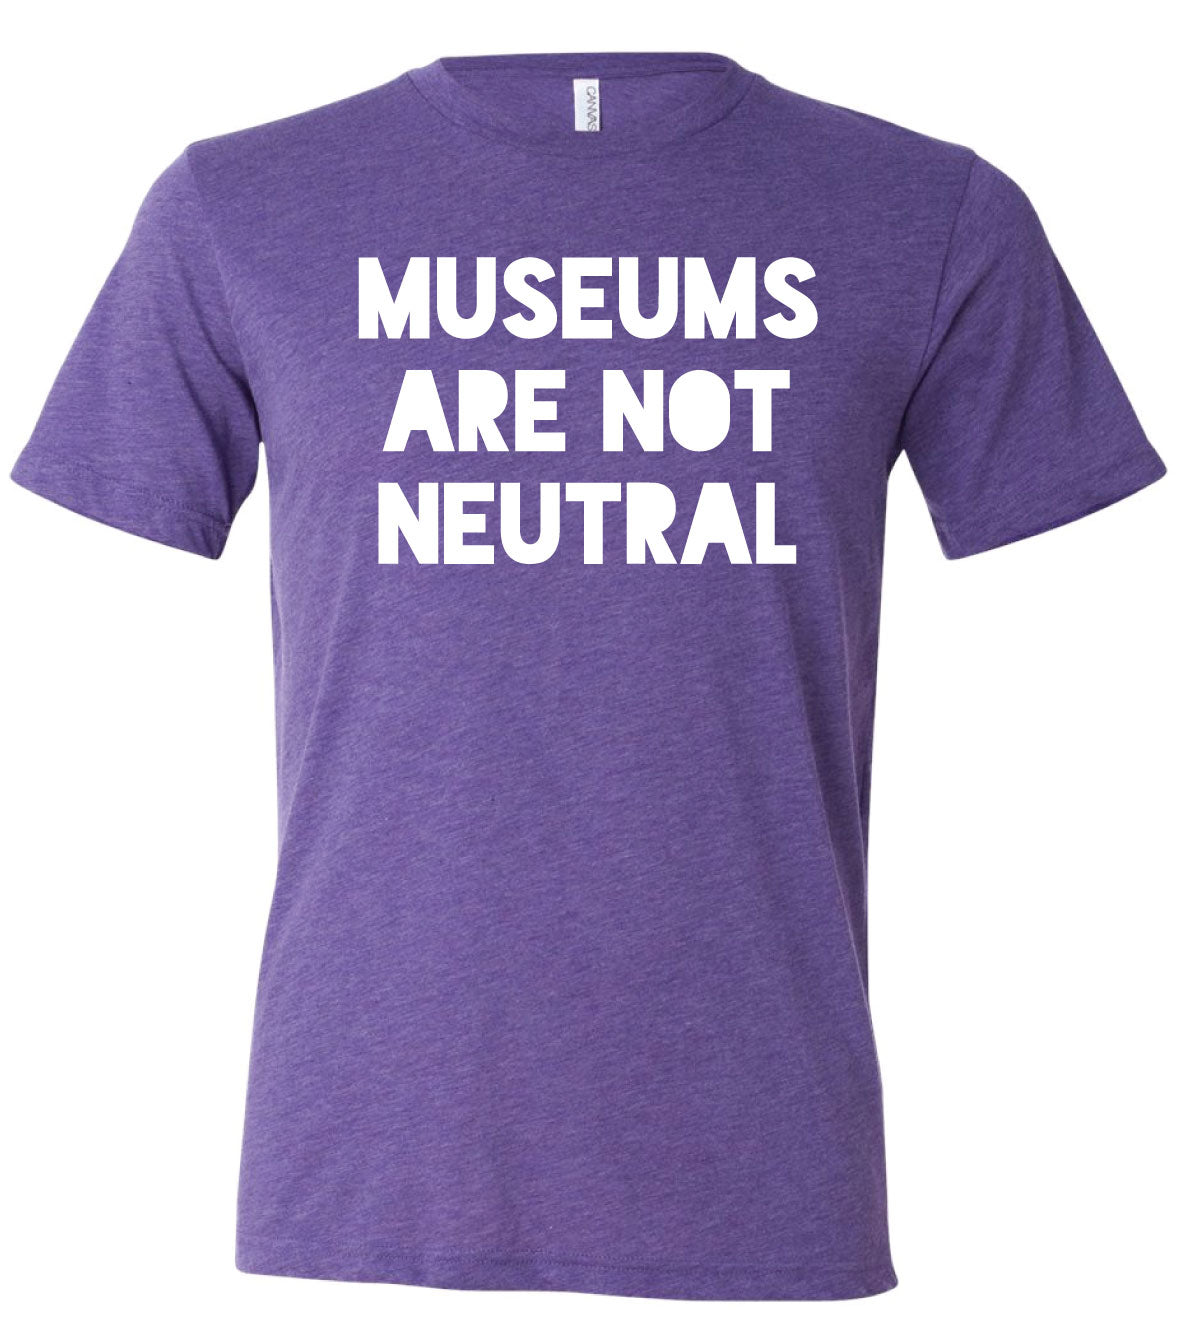 Photo of purple tshirt with white font, reading “Museums Are Not Neutral”.